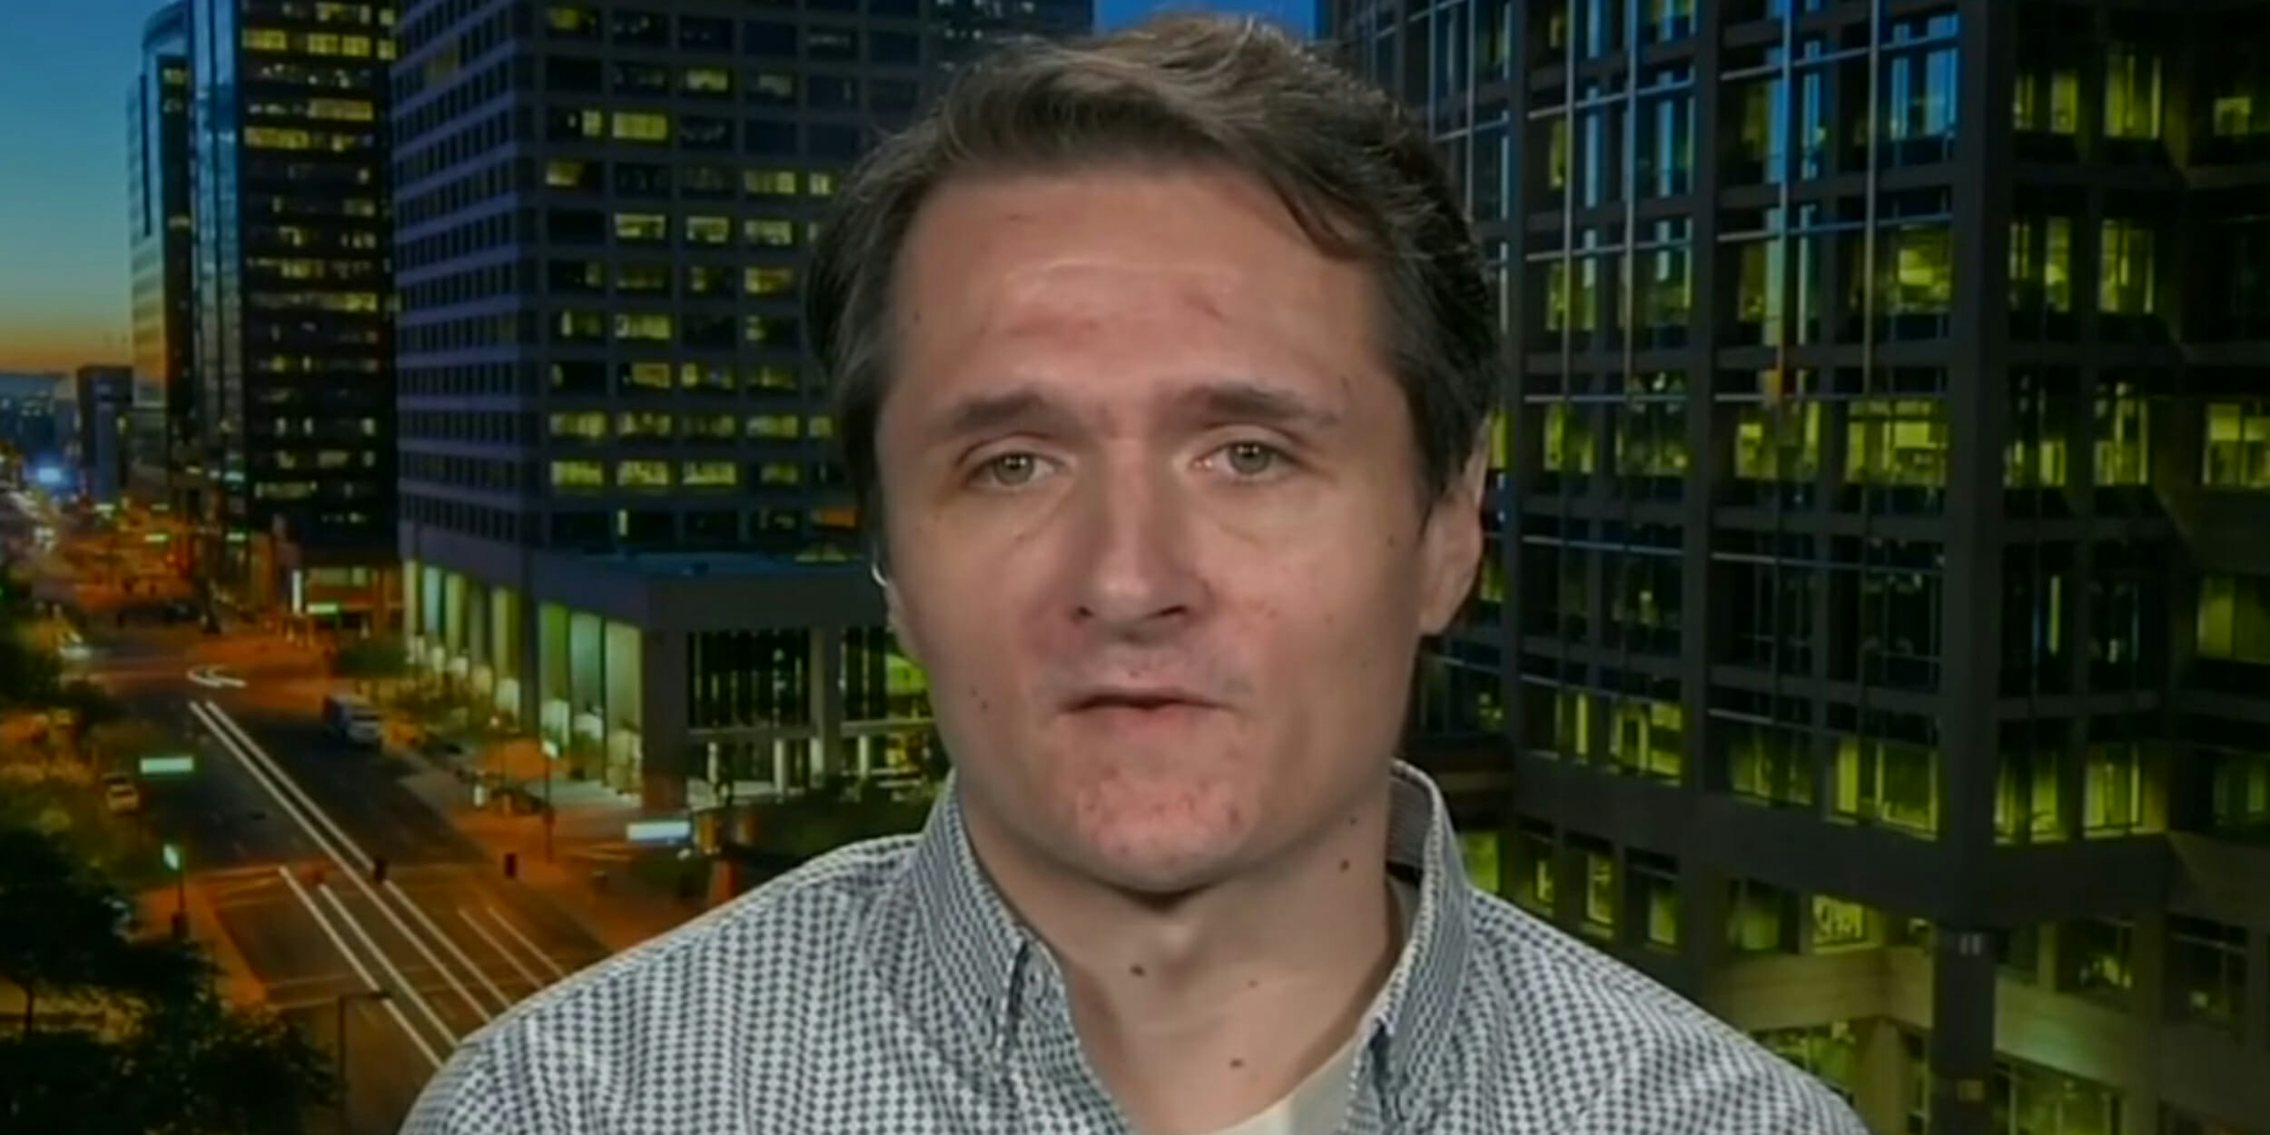 Paul Horner, a prominent fake news writer, was found dead.